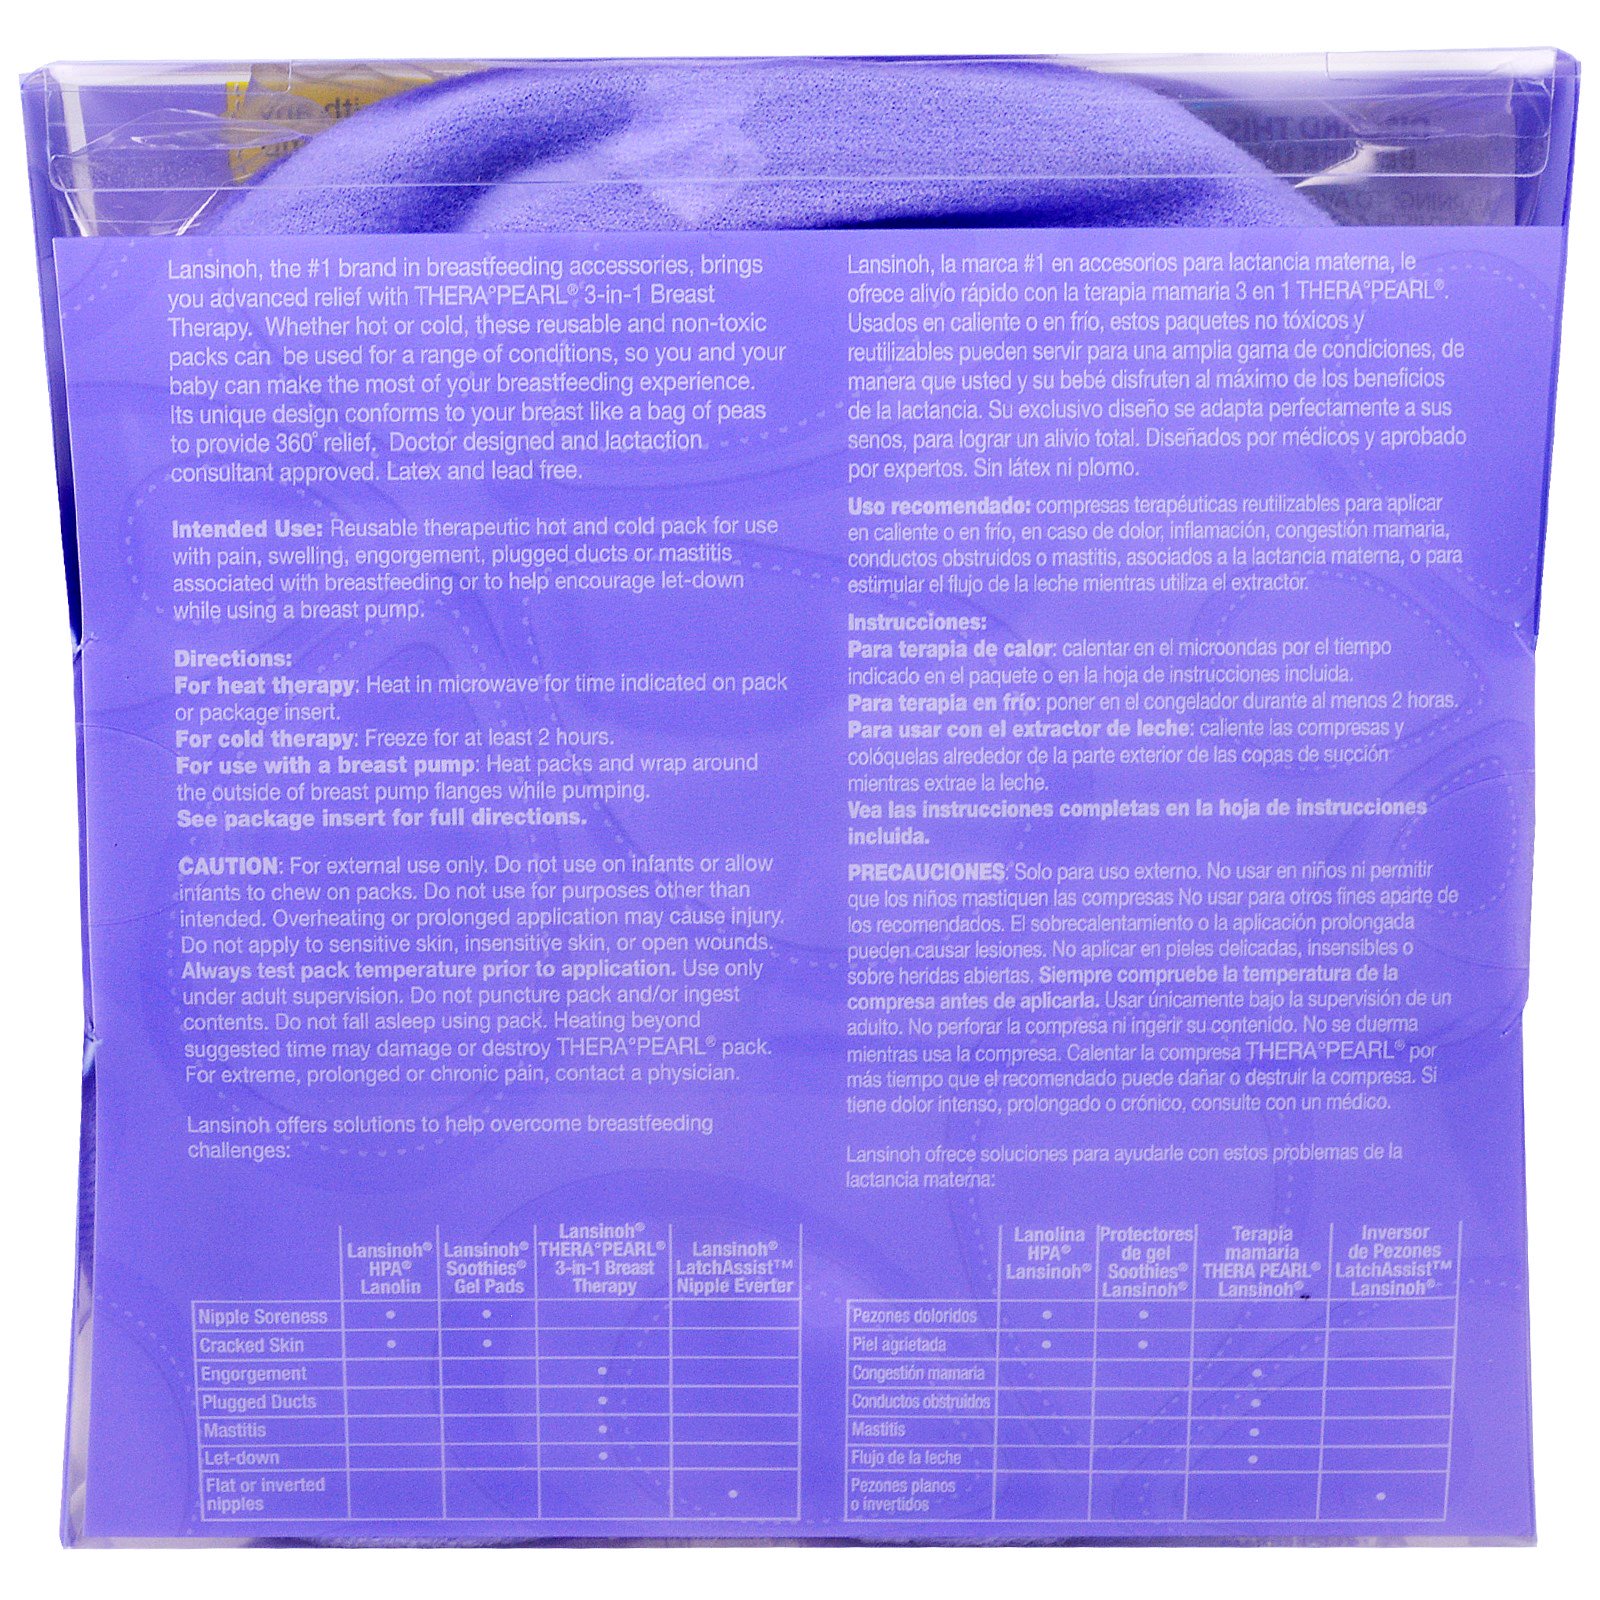 Lansinoh TheraPearl 3-in-1 Breast Therapy Pads